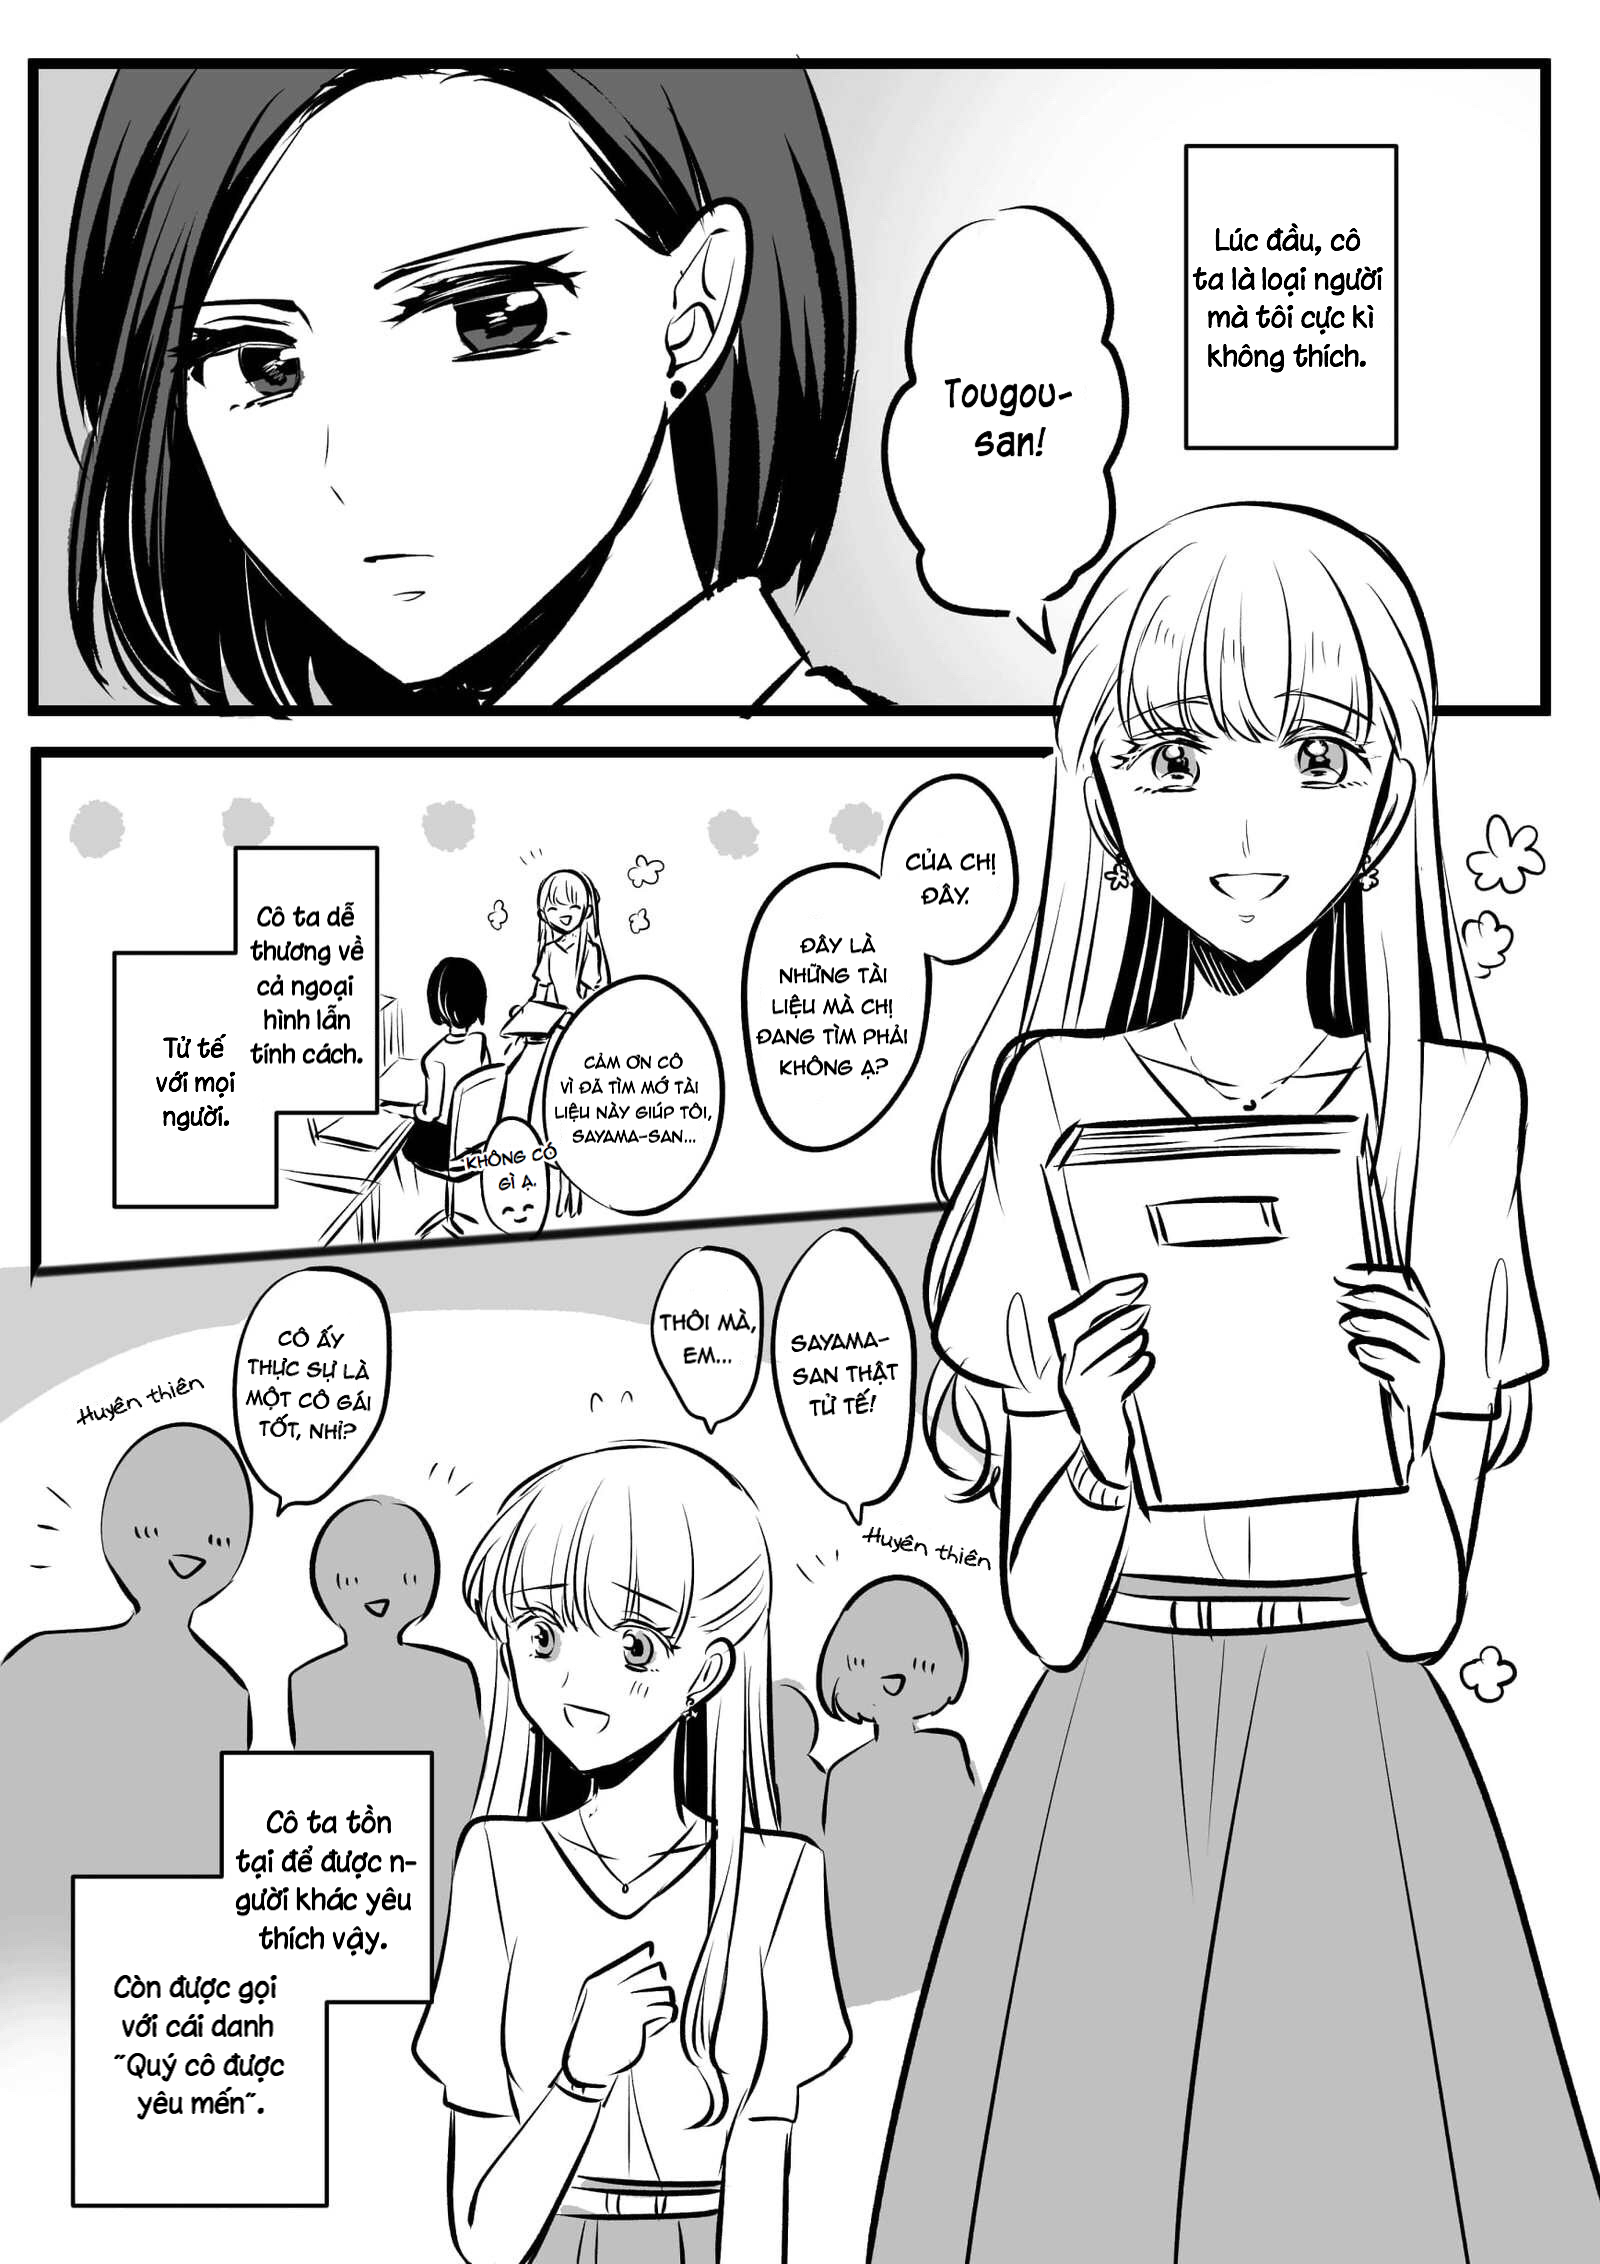 A Yuri Story About A Junior I Couldn’t Stand